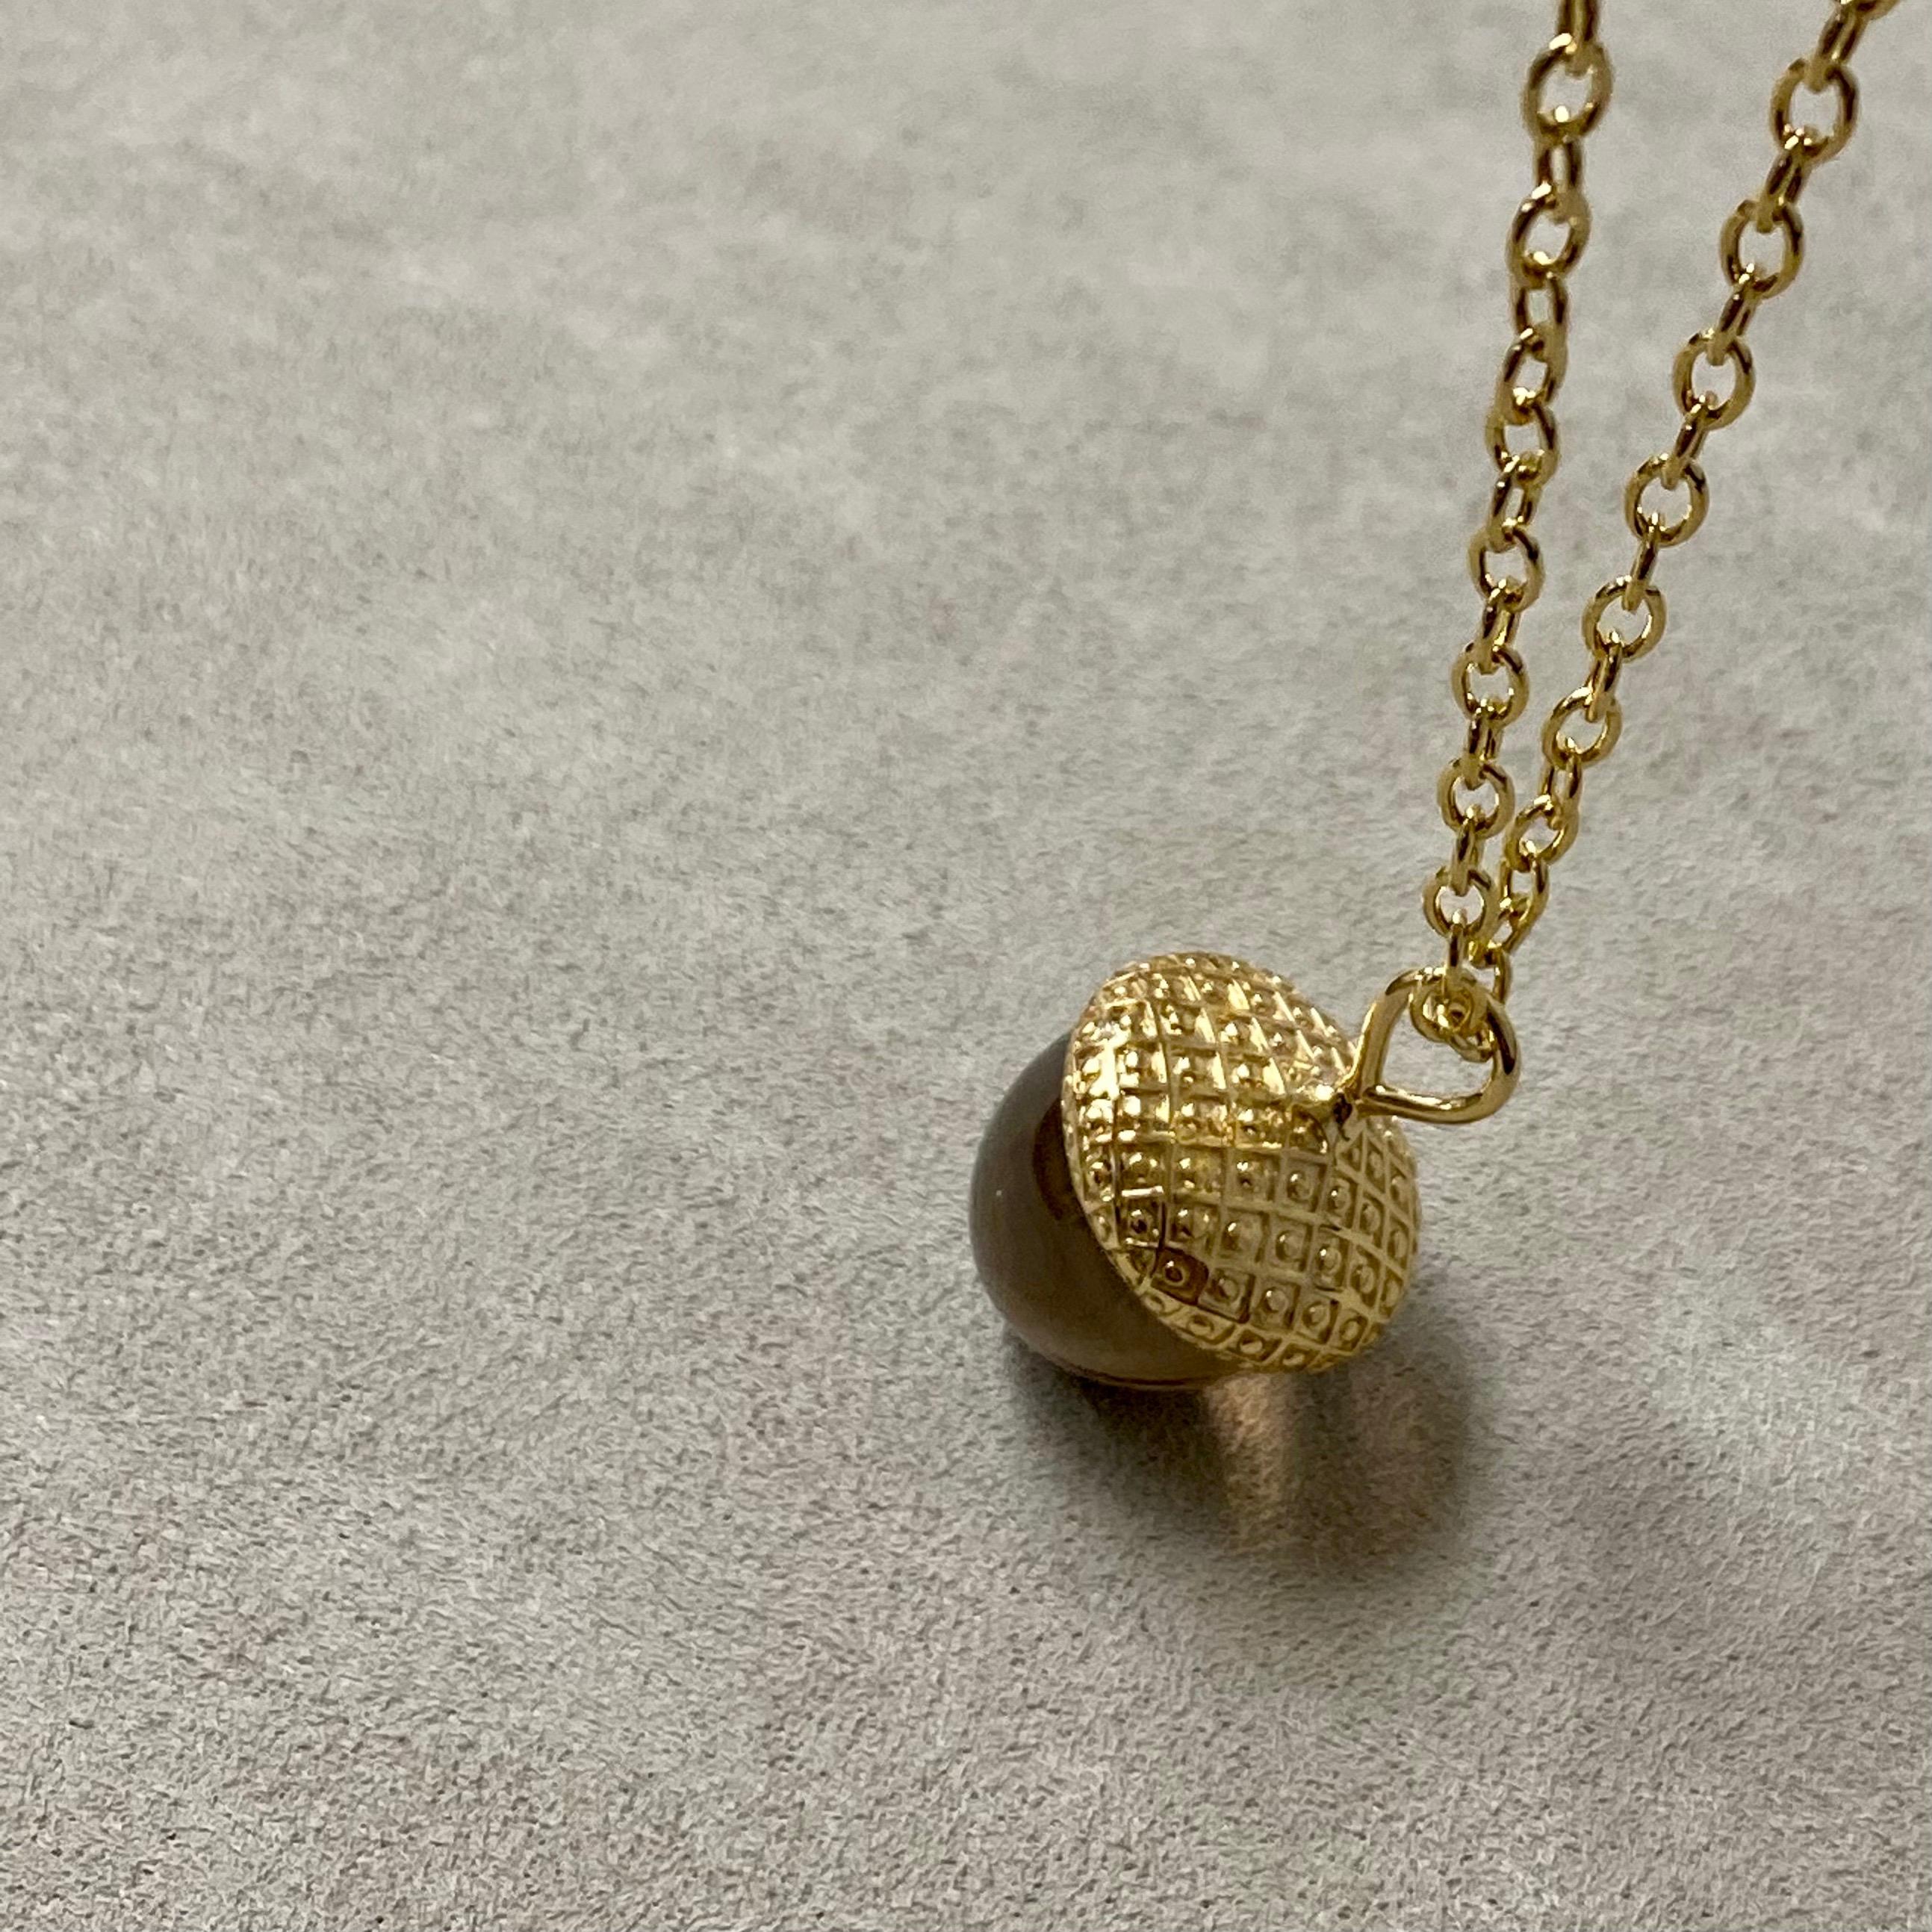 acorn necklace meaning